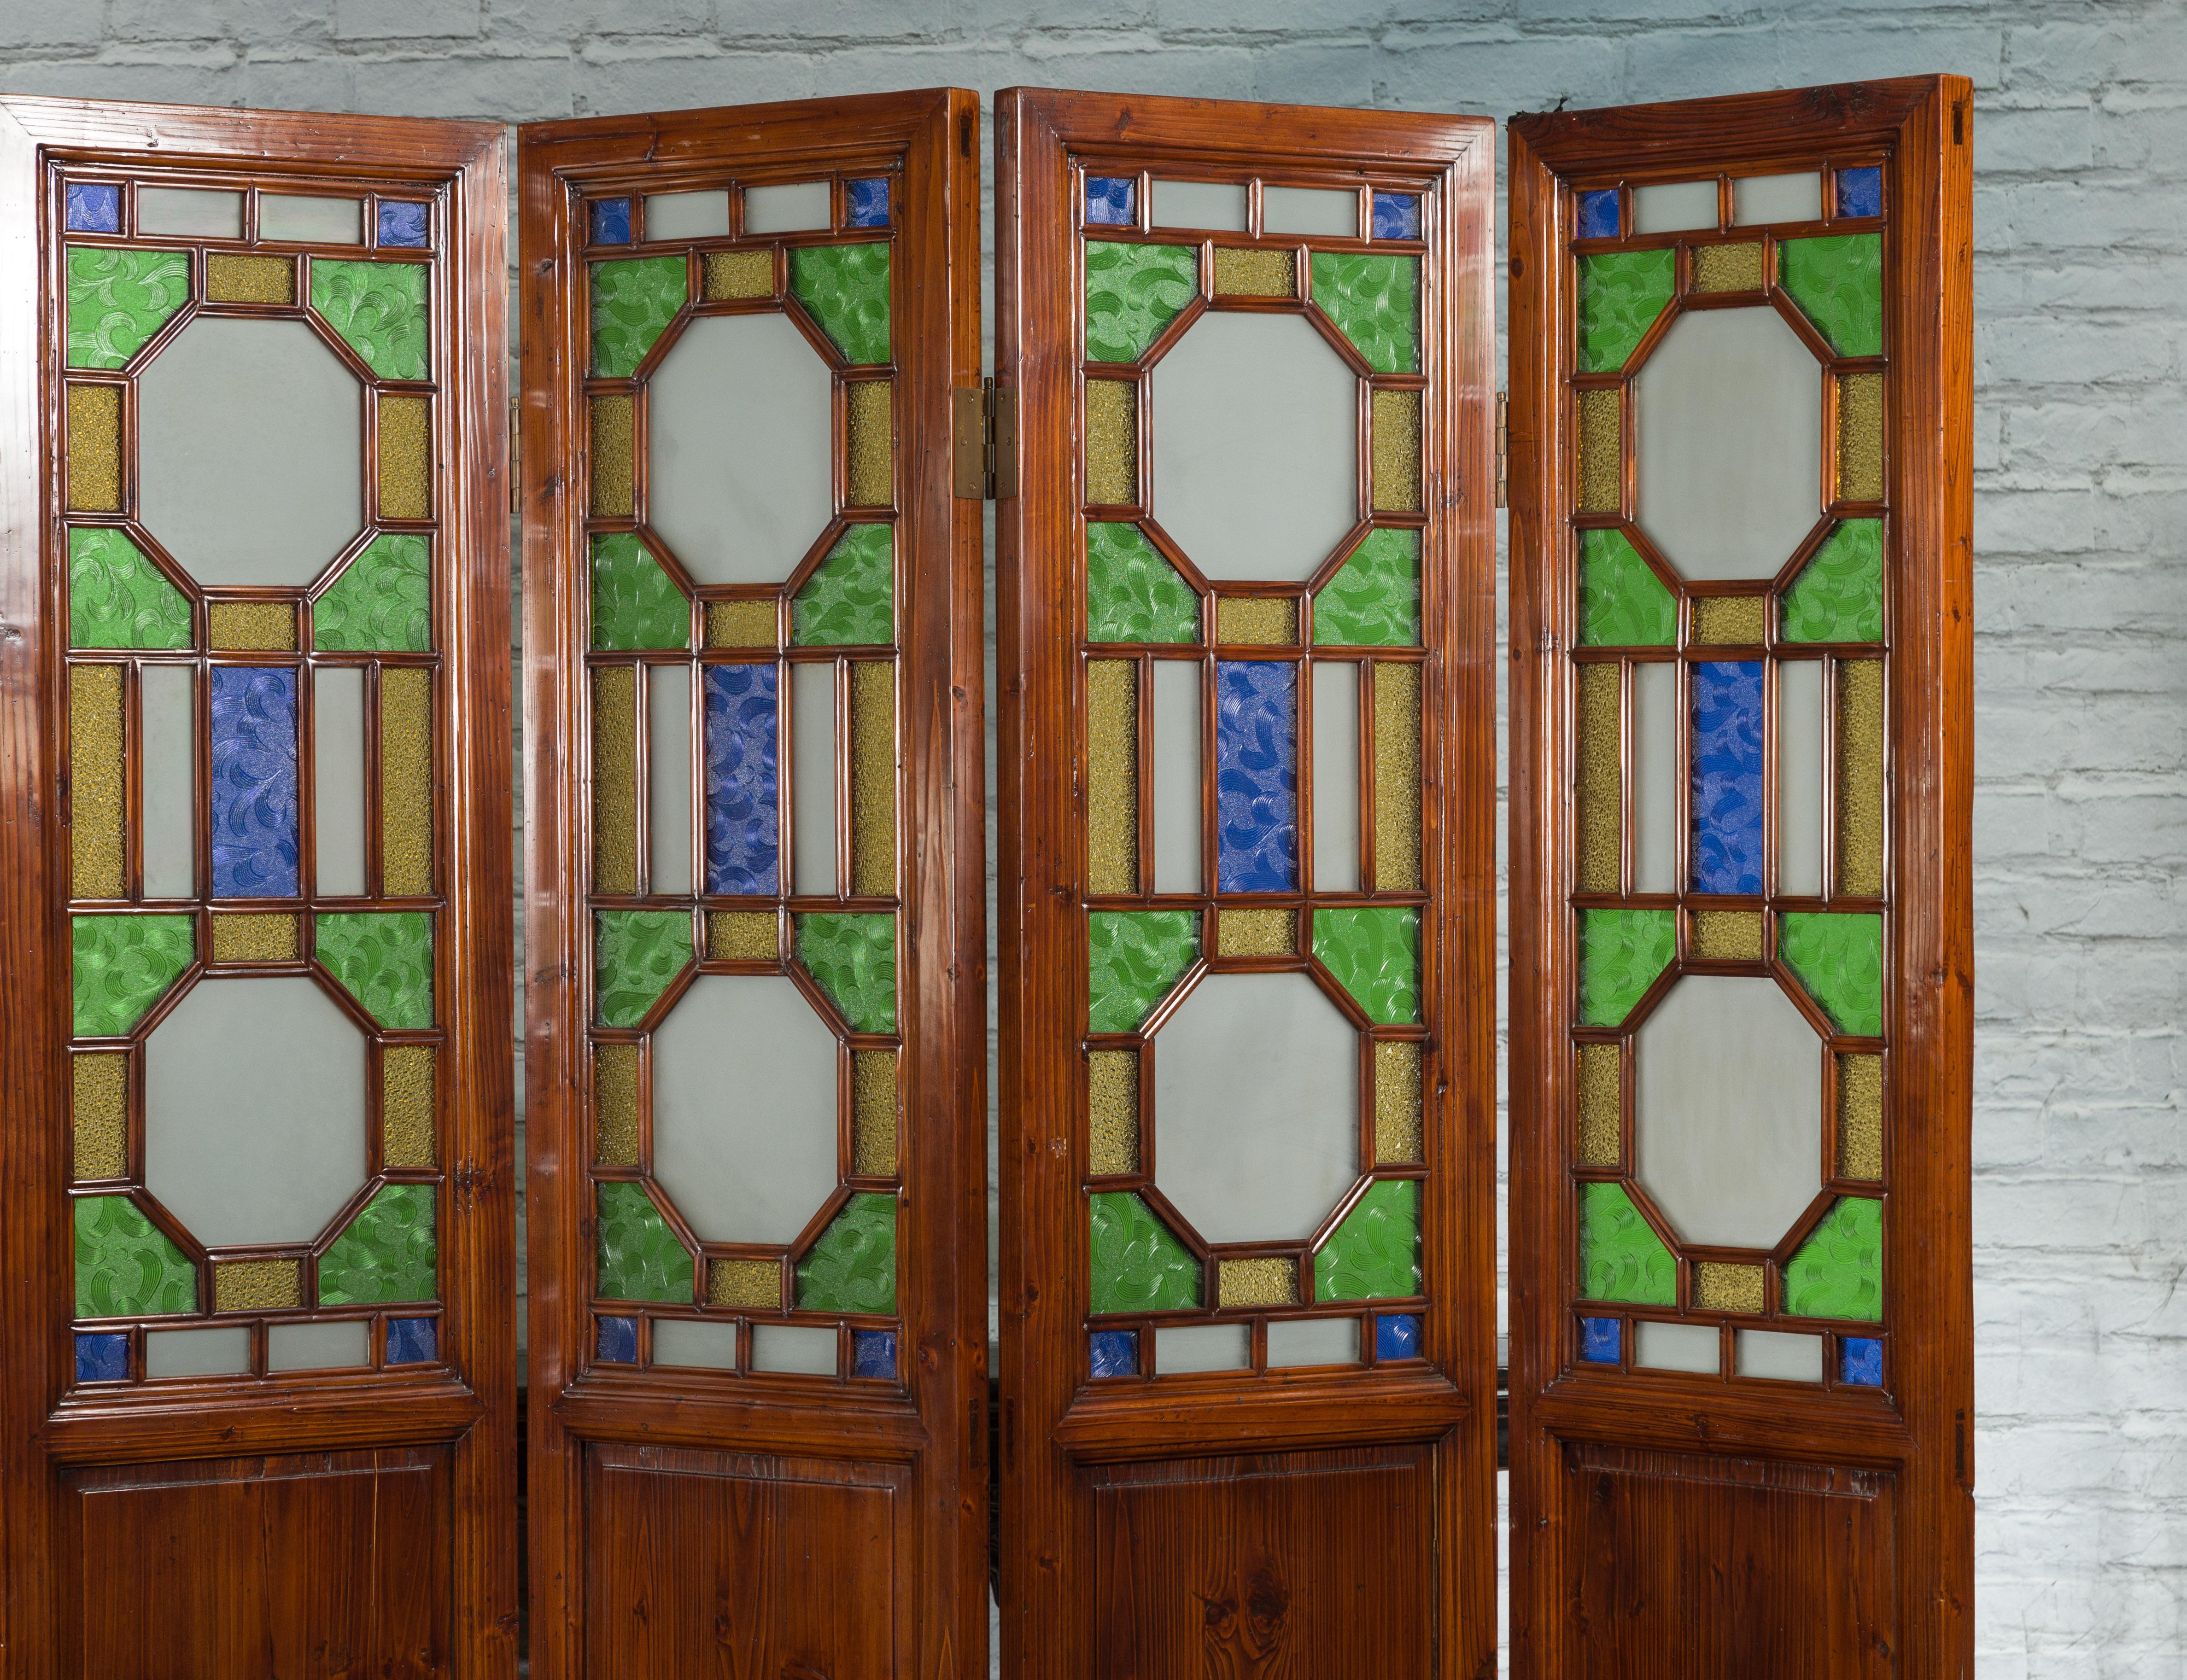 Chinese Antique Six-Panel Folding Screen with Stained Glass Geometric Motifs In Good Condition For Sale In Yonkers, NY